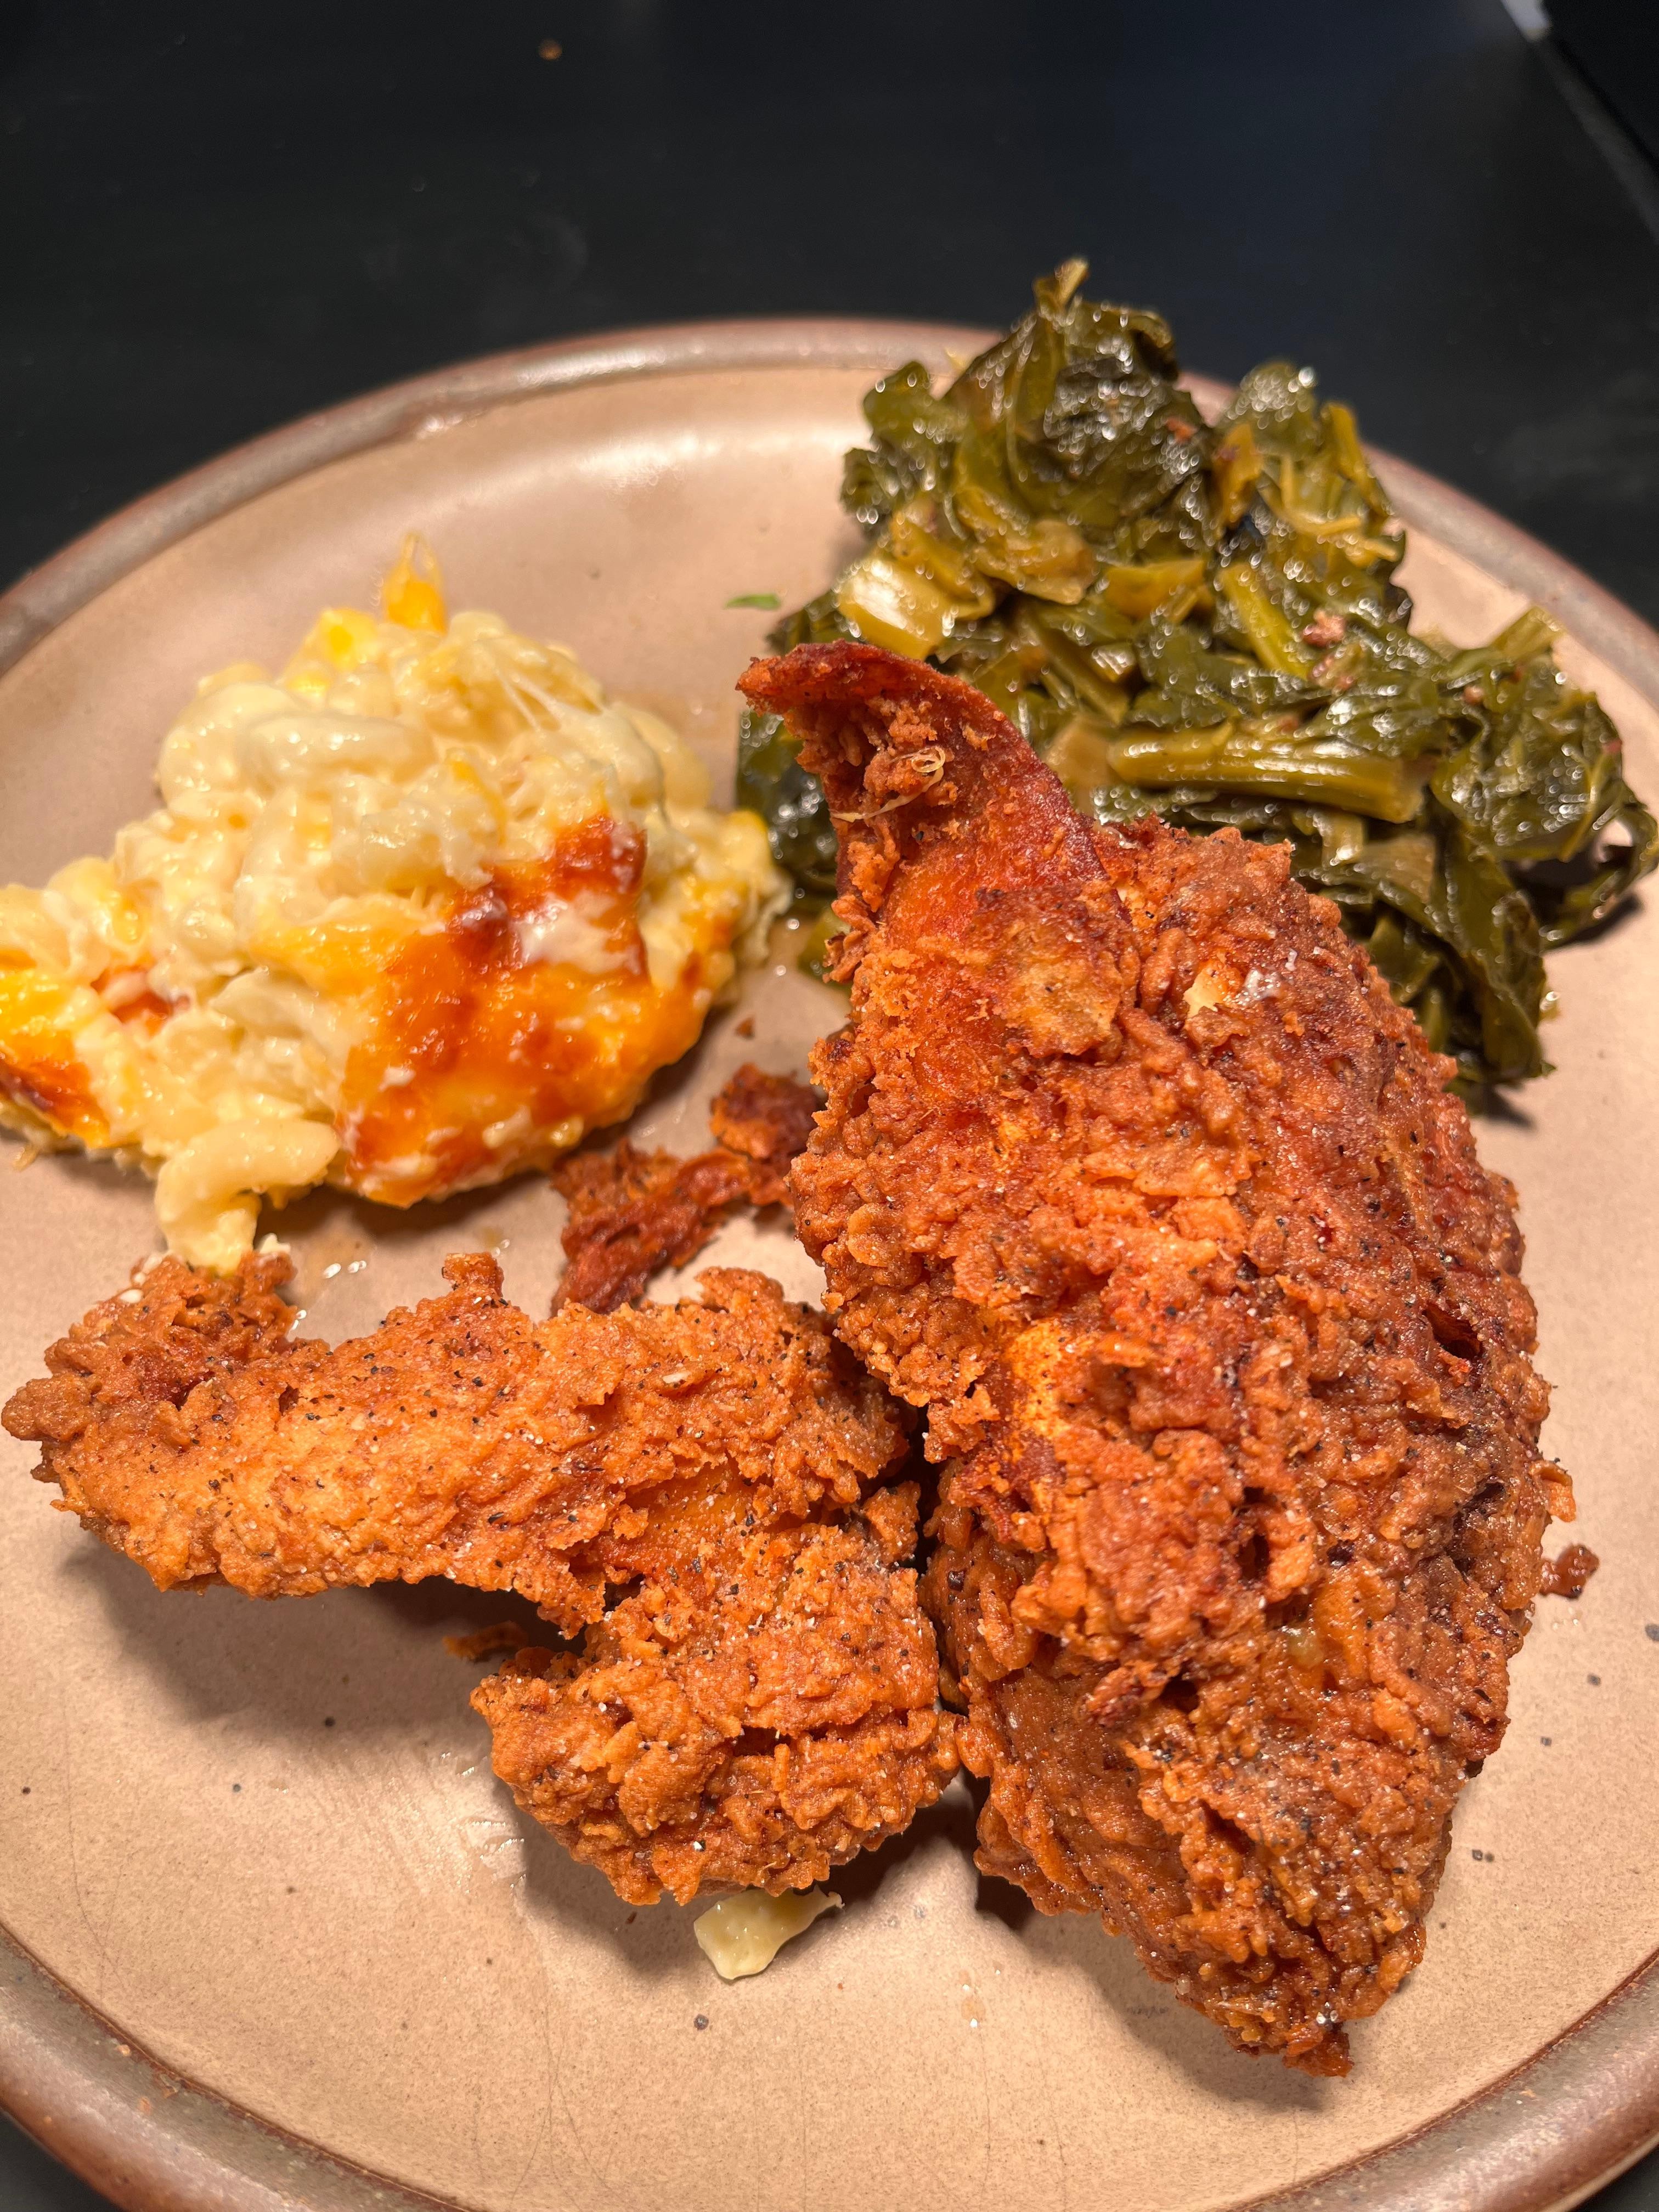 Fried Chicken White Lunch Plate